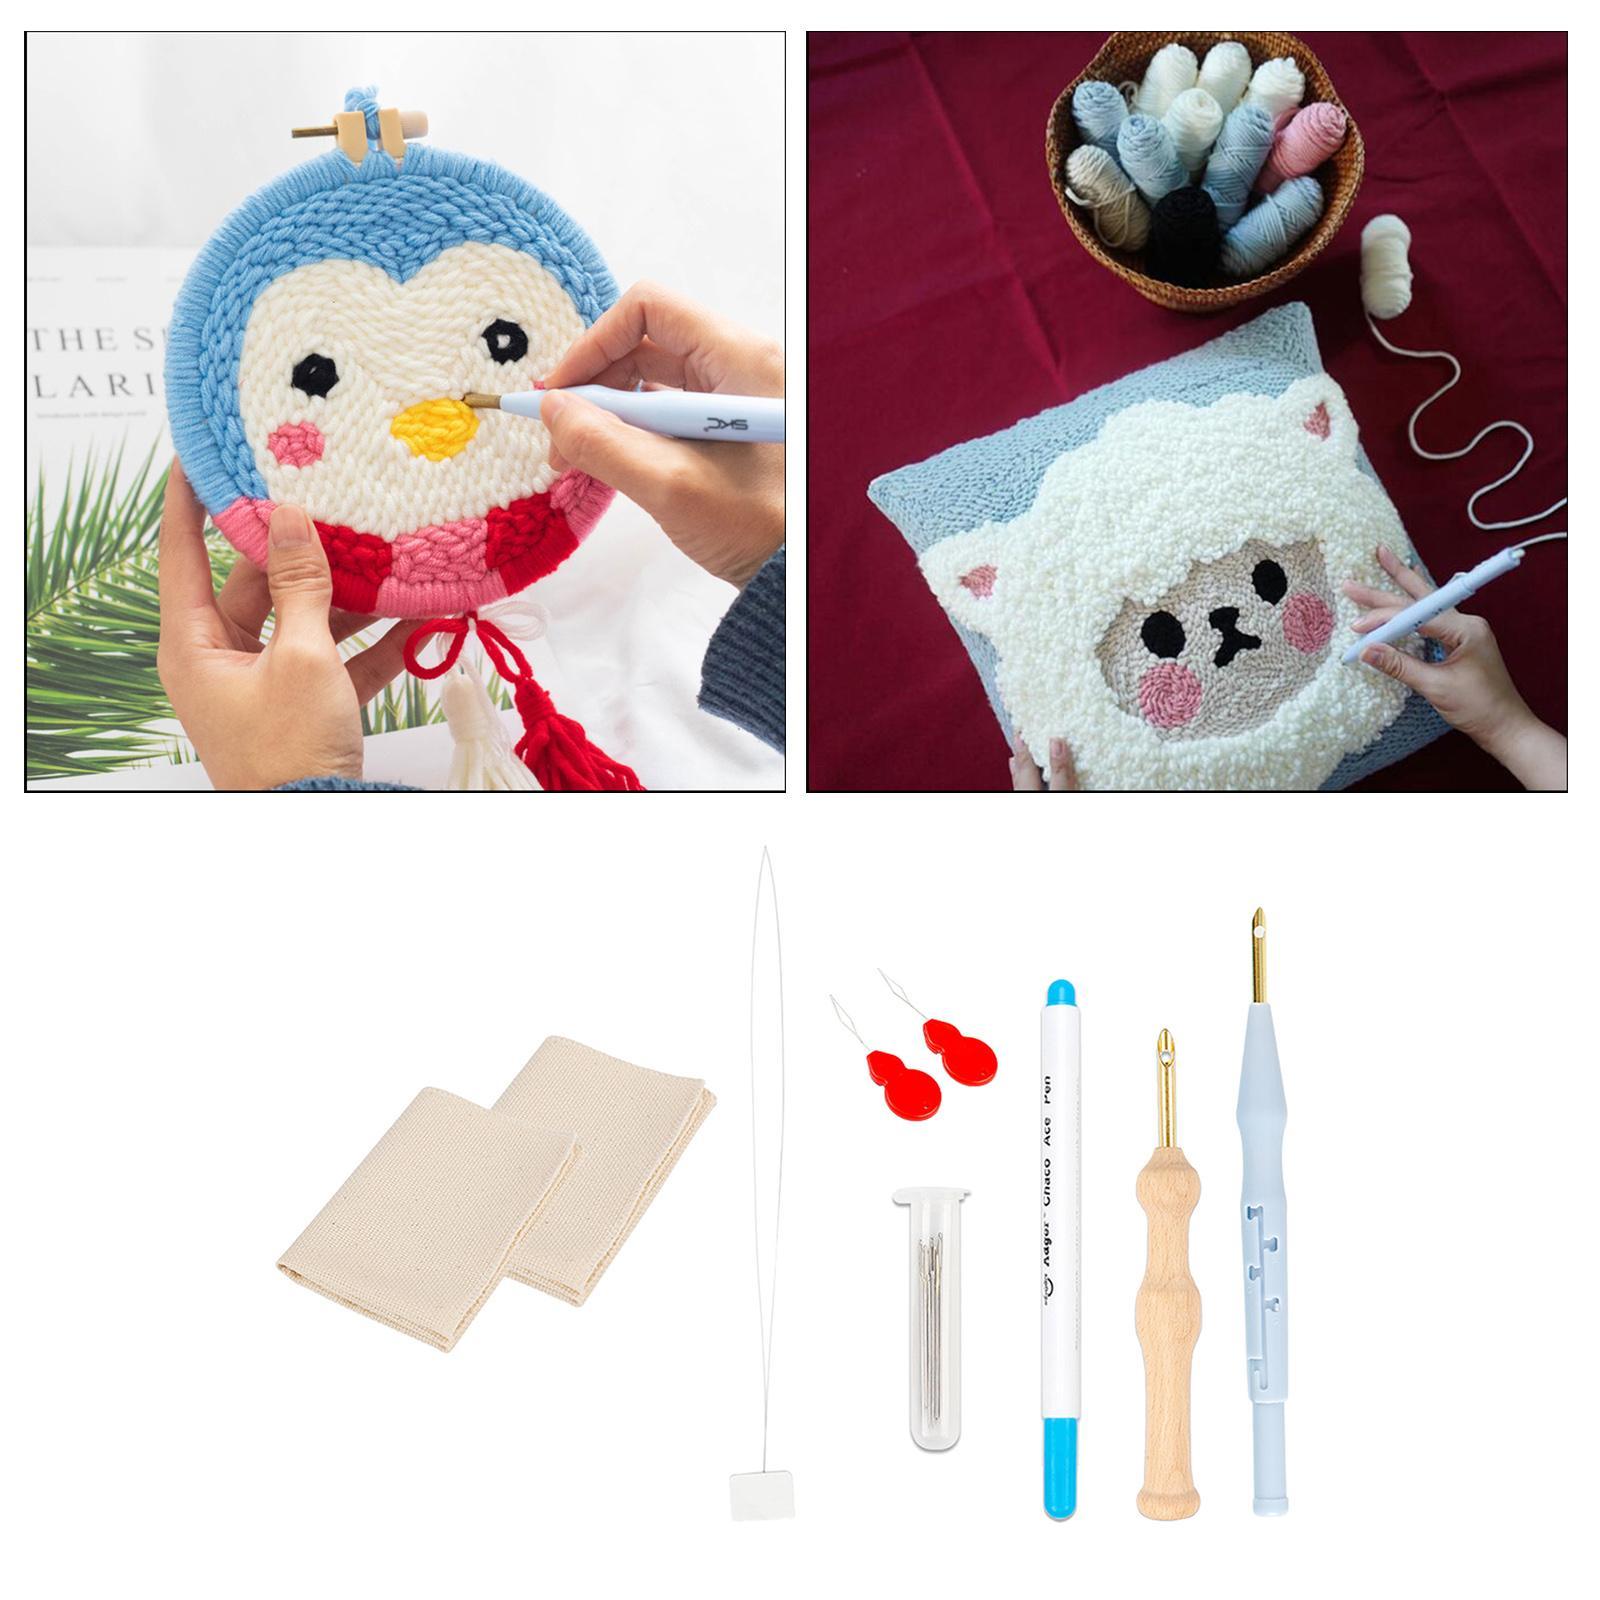 8 Pcs Punch Needle Embroidery Kits Rug Making Yarn Punch Needle, Poking Embroidery Pen, Needle Threader, Punch Needle Cloth for Cross Stitching